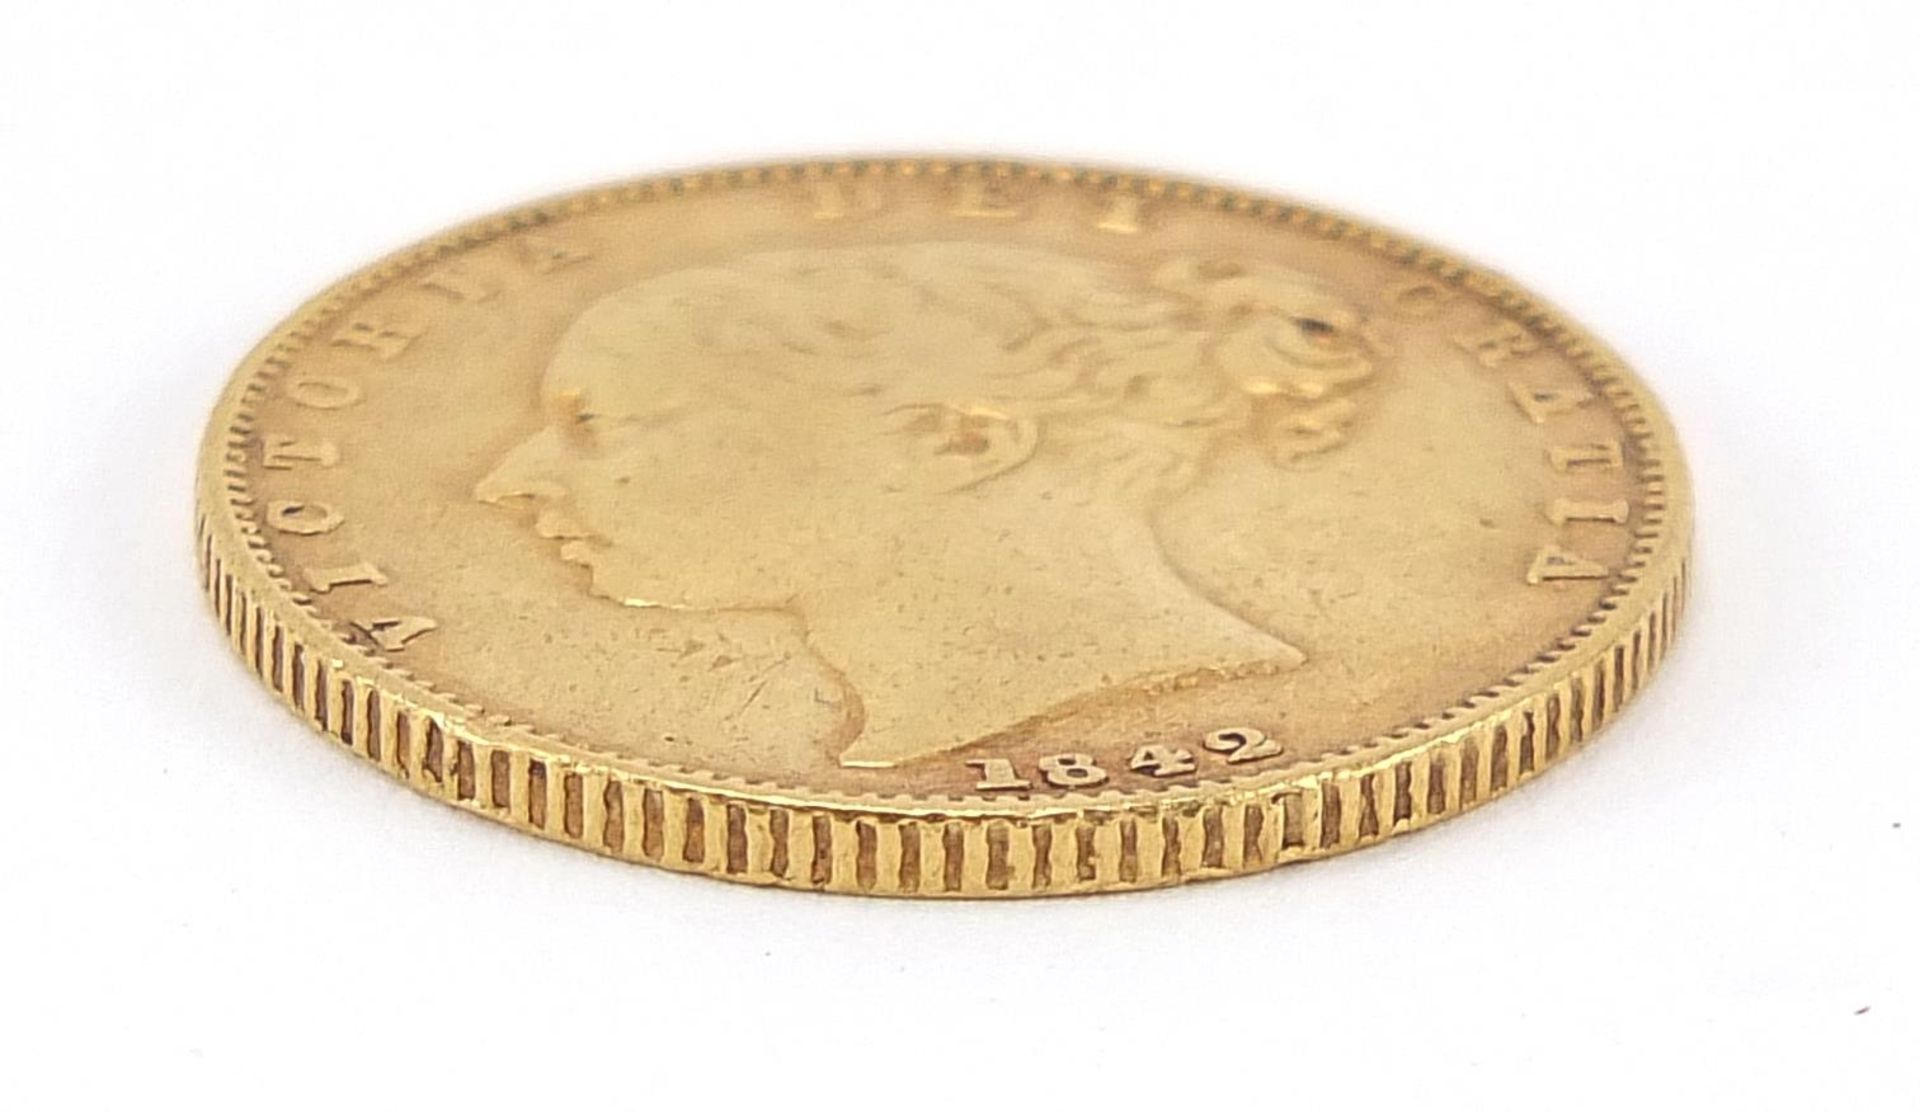 Queen Victoria Young Head 1842 shield back gold sovereign - this lot is sold without buyer's premium - Image 3 of 3